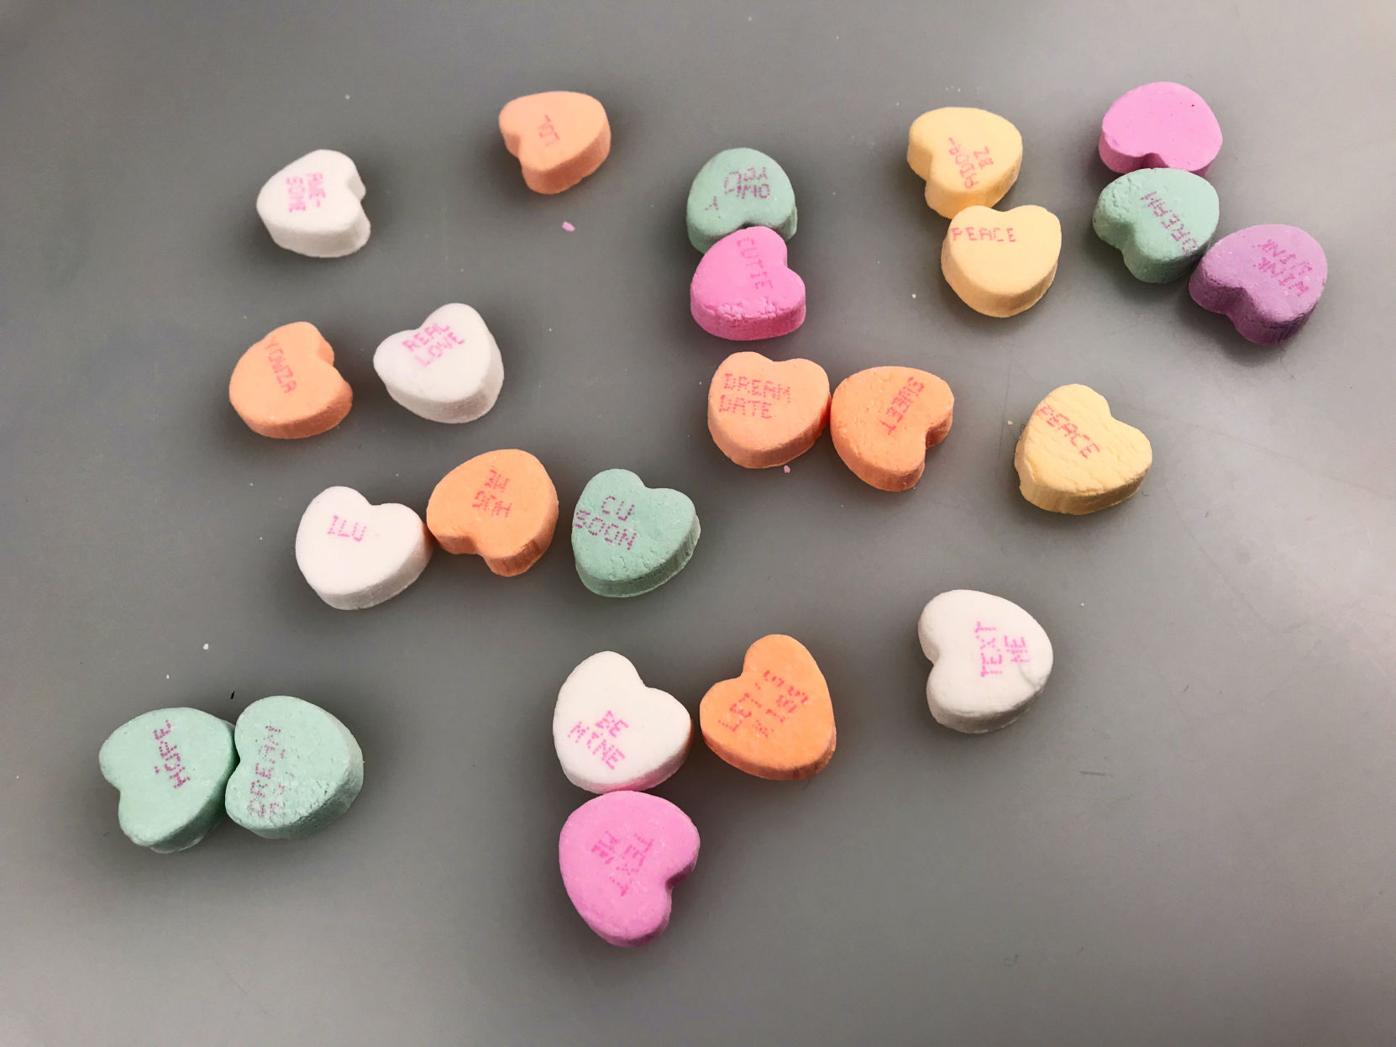 Loss for words: Conversations missing from some Sweethearts candy